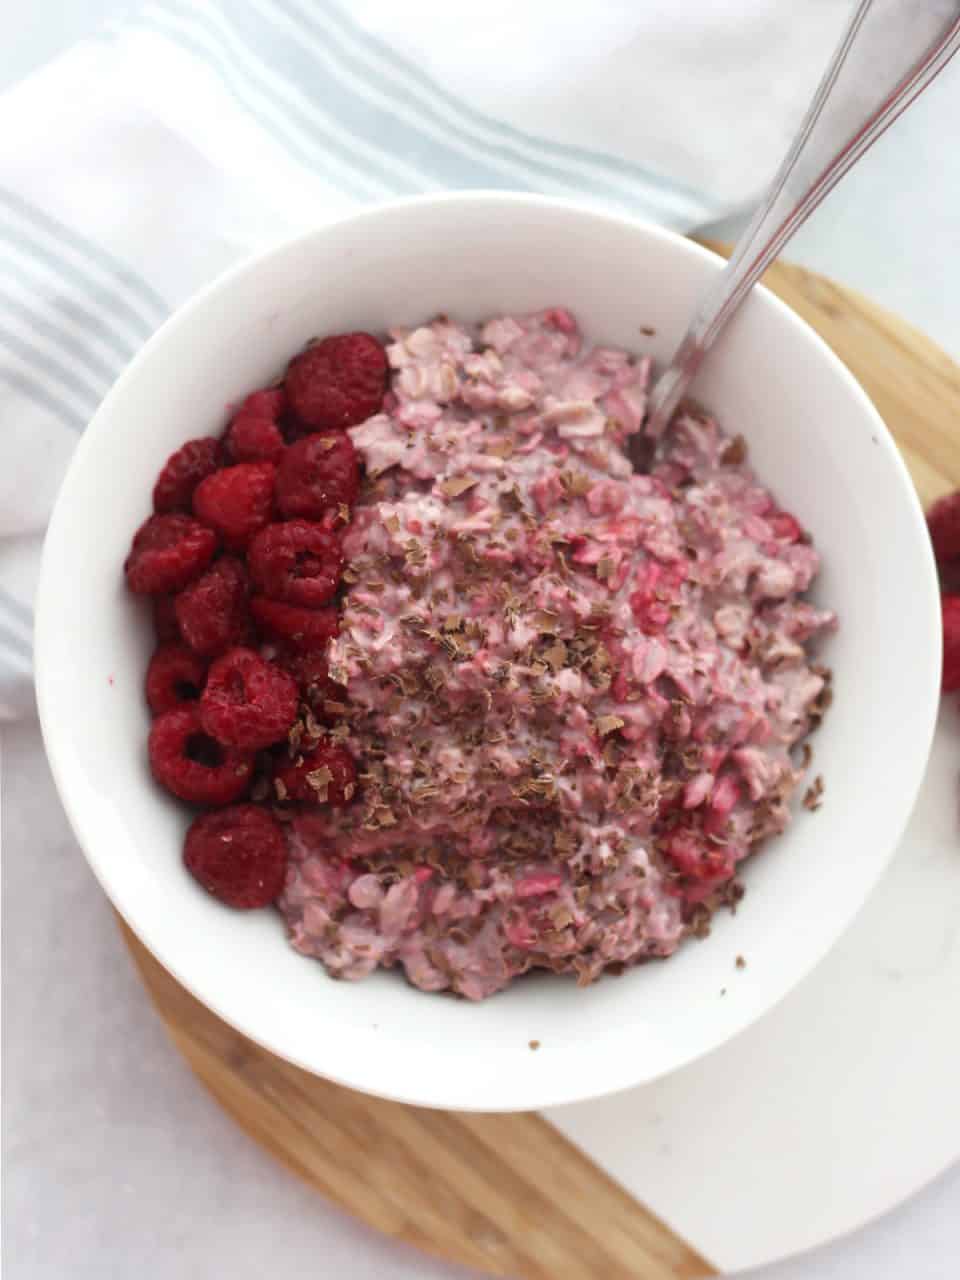 A spoon in a bowl of overnight oats with fresh raspberries and shaved dark chocolate.